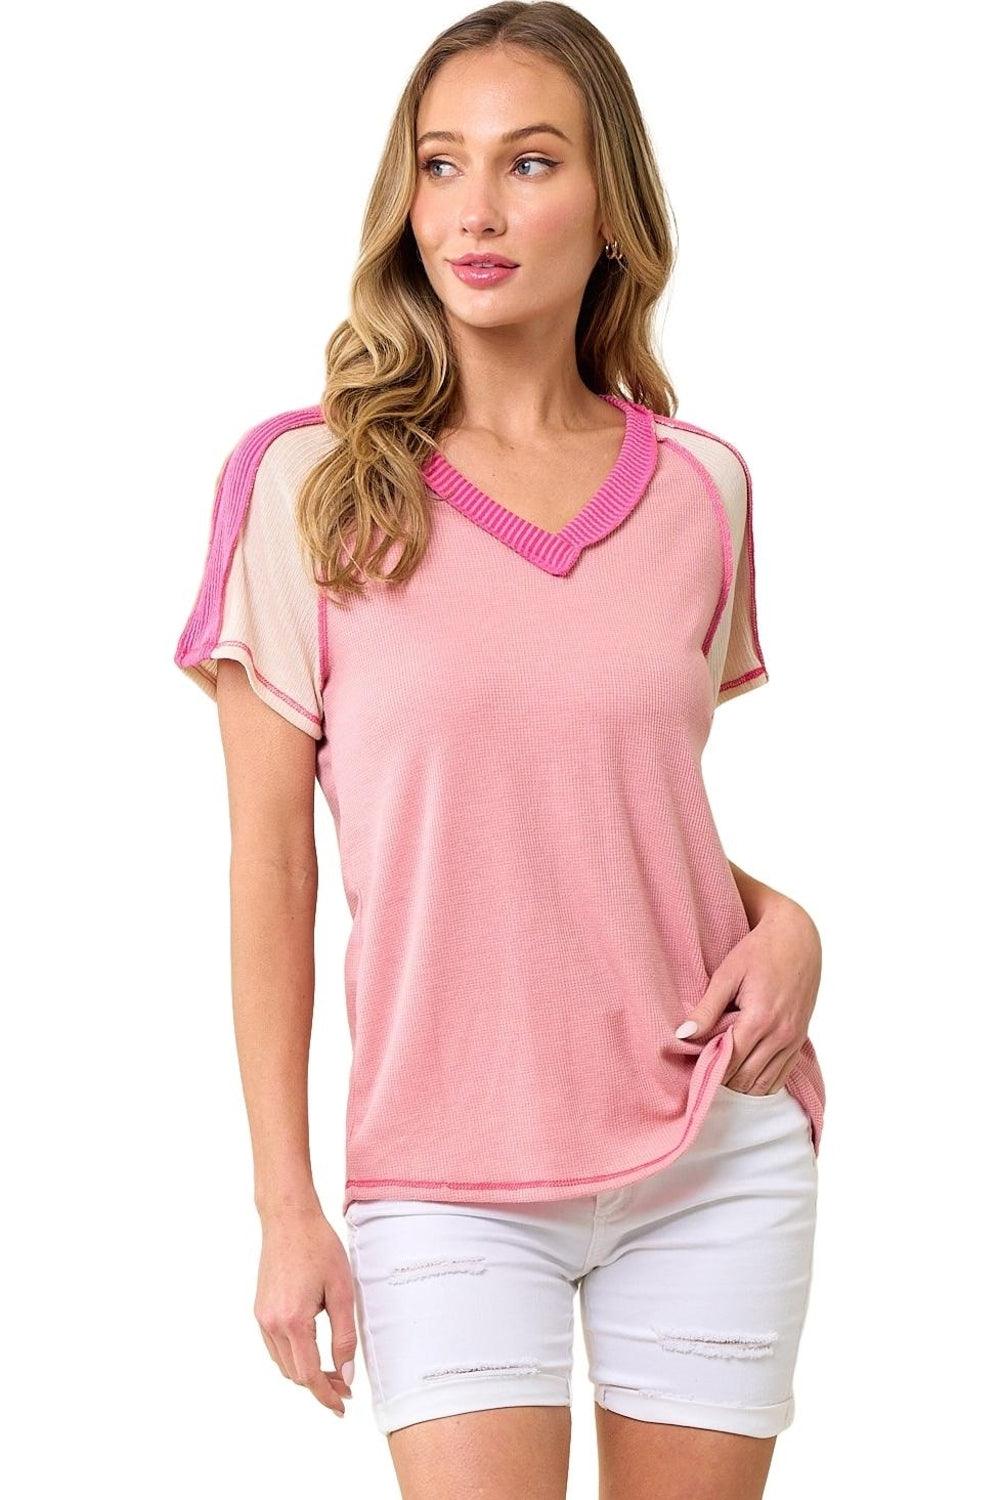 Pink Exposed Seam Color Block Knitted V Neck T-shirt - L & M Kee, LLC